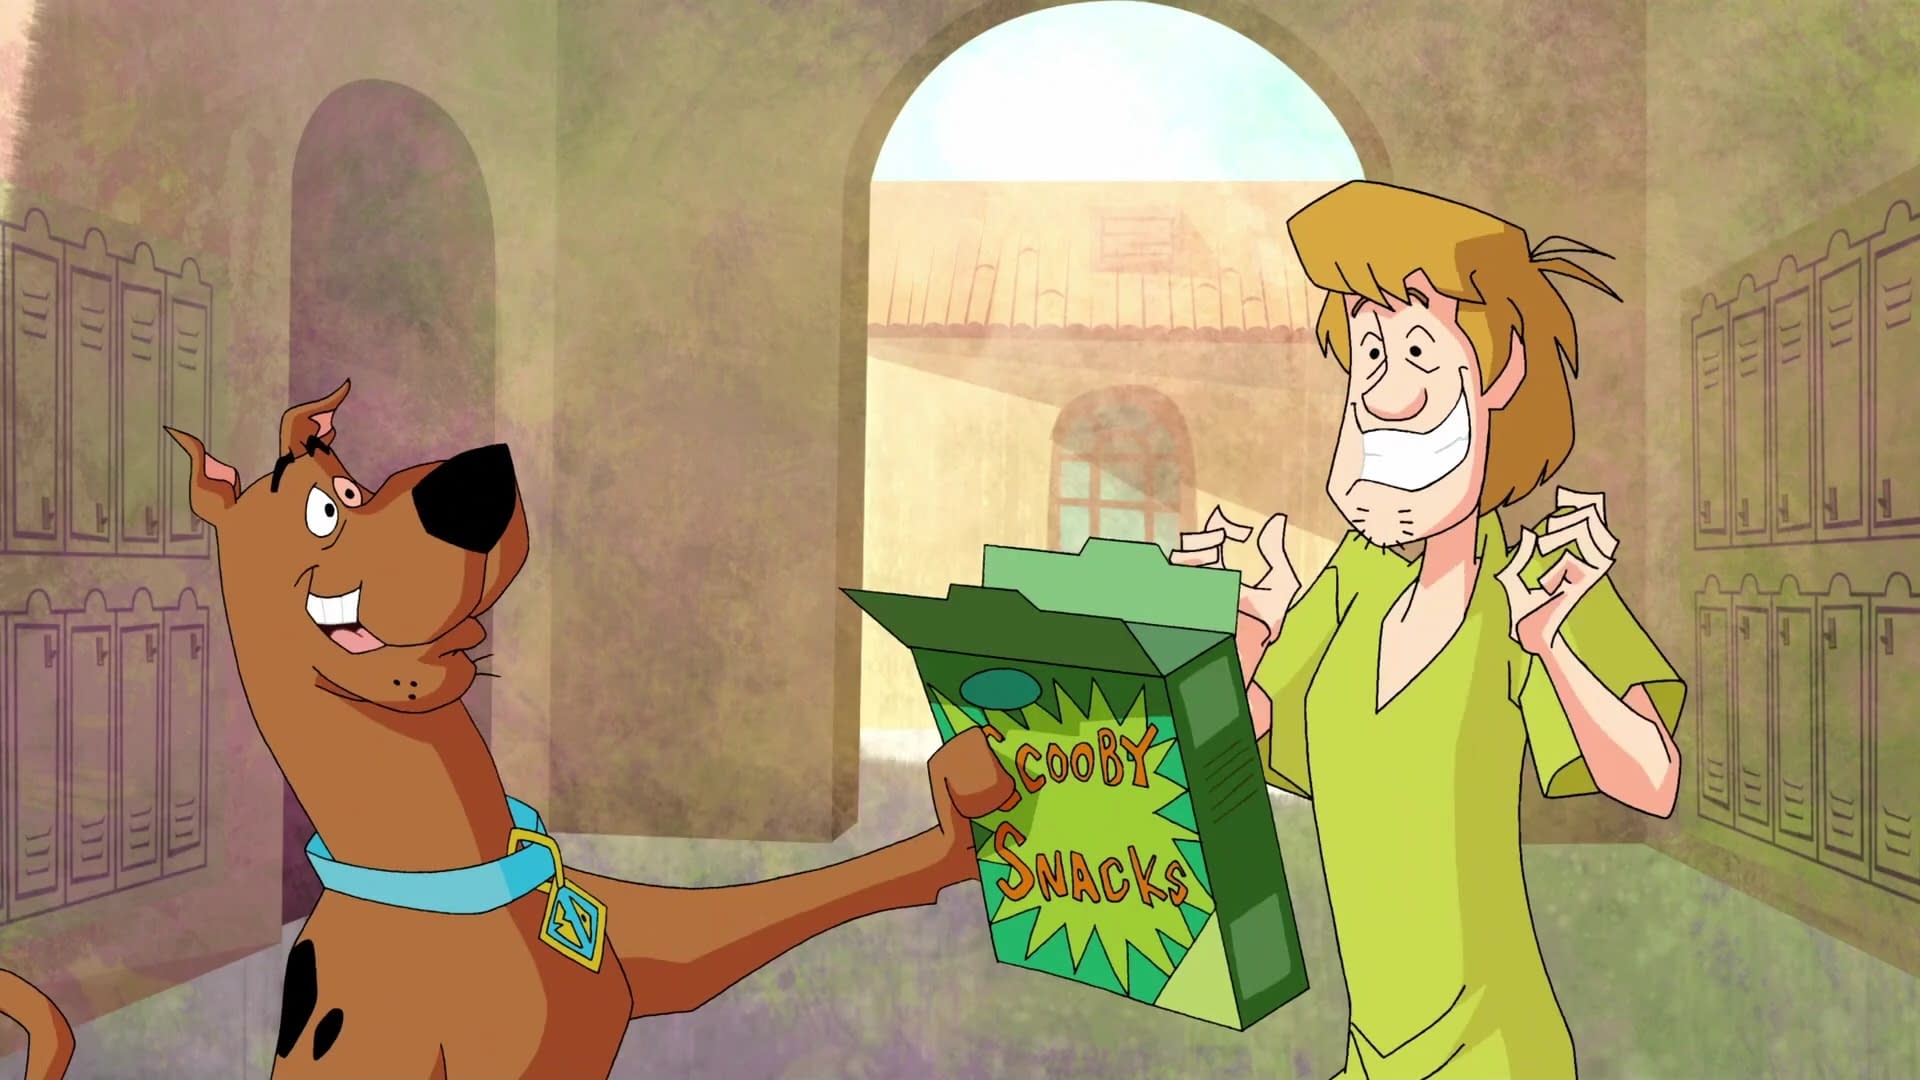 Scooby Snacks Recipe Will Make Your Shaggy and Scooby-Doo Drool